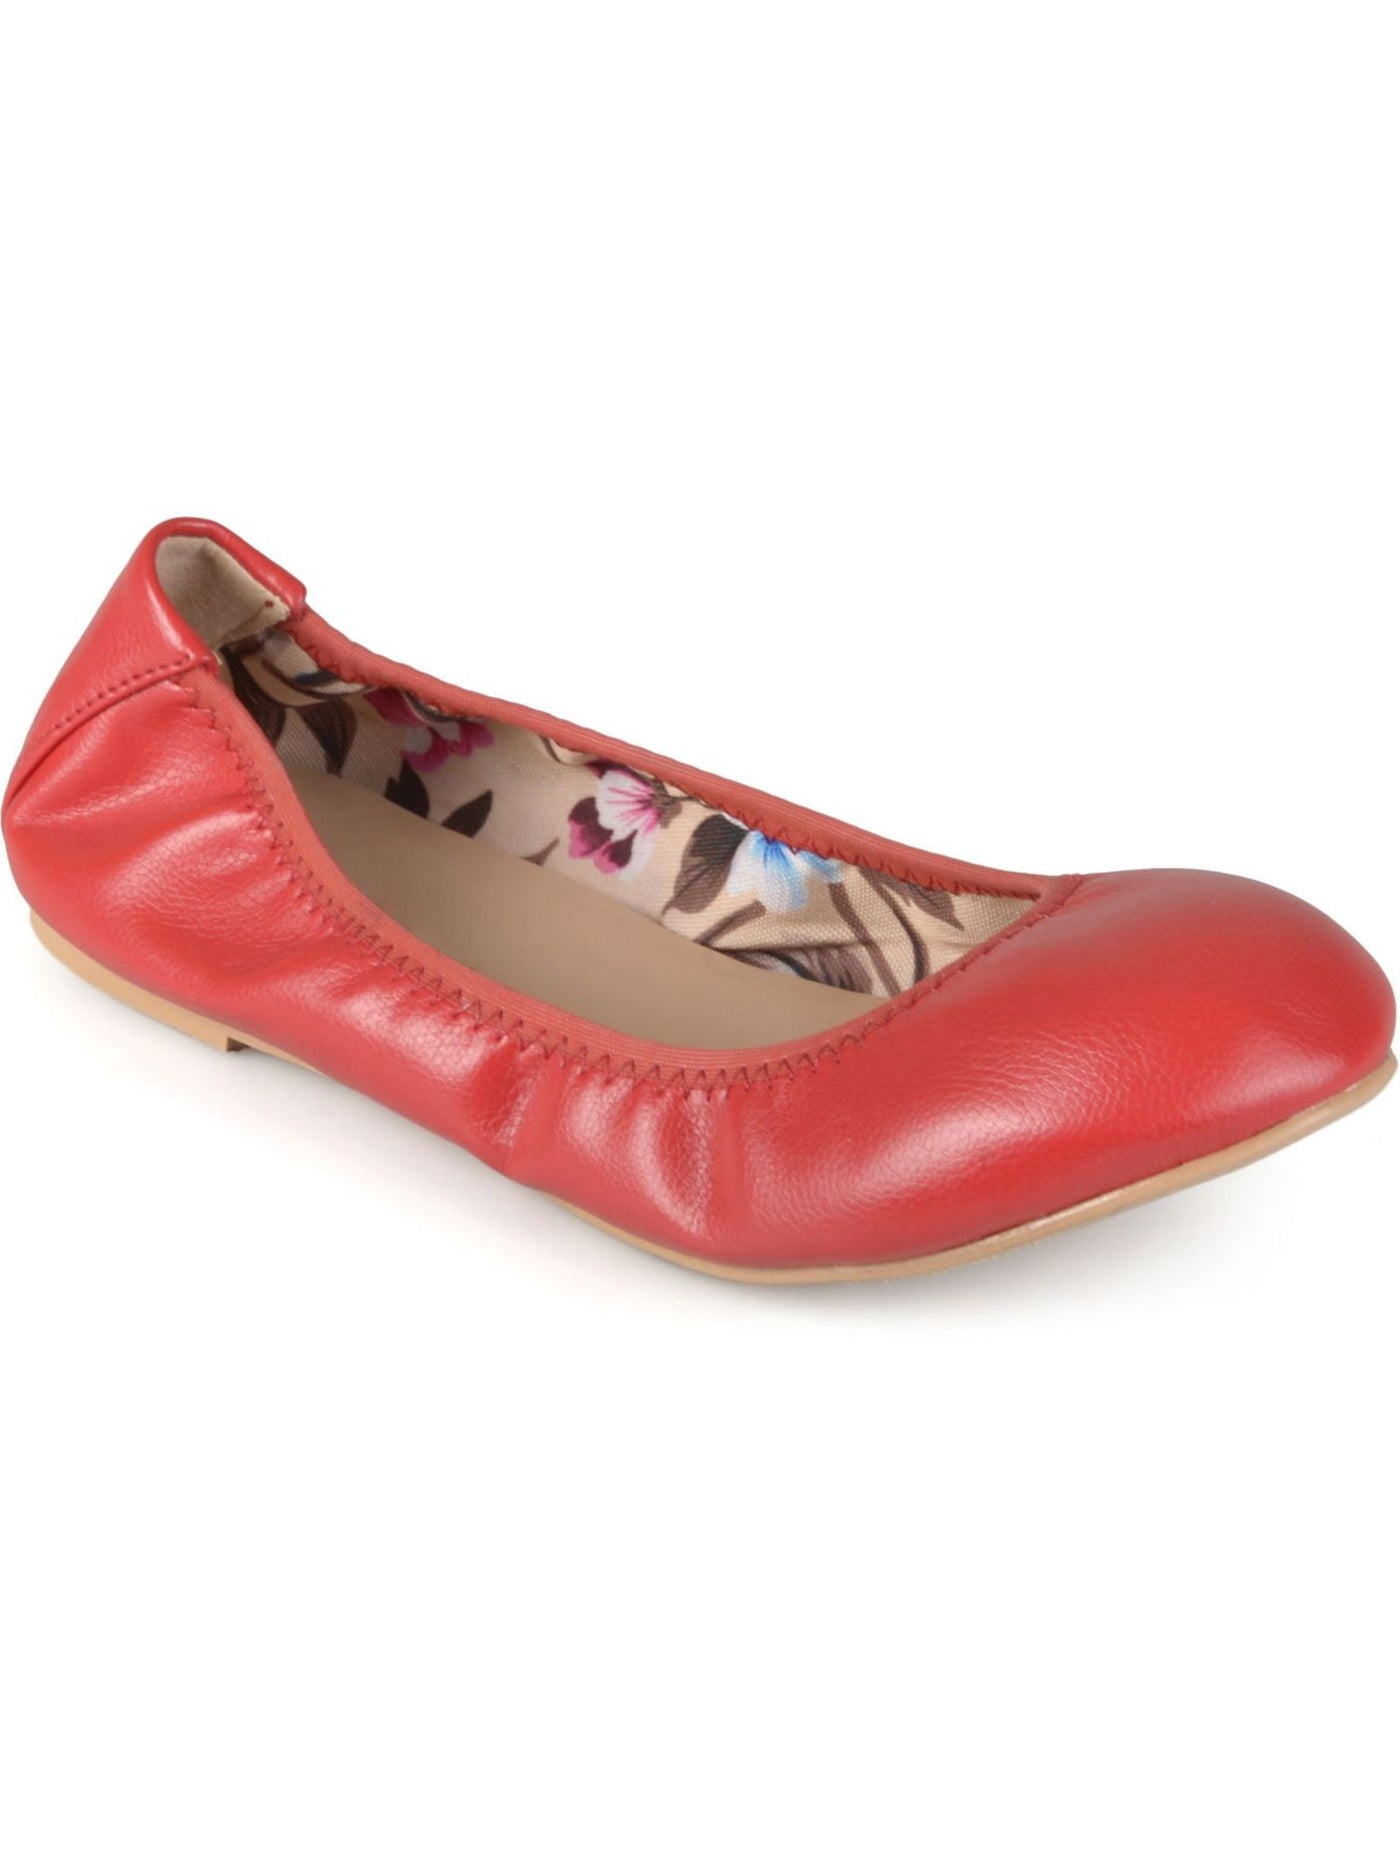 JOURNEE COLLECTION Womens Red Scrunched Ruched Lindy Round Toe Slip On Ballet Flats 8.5